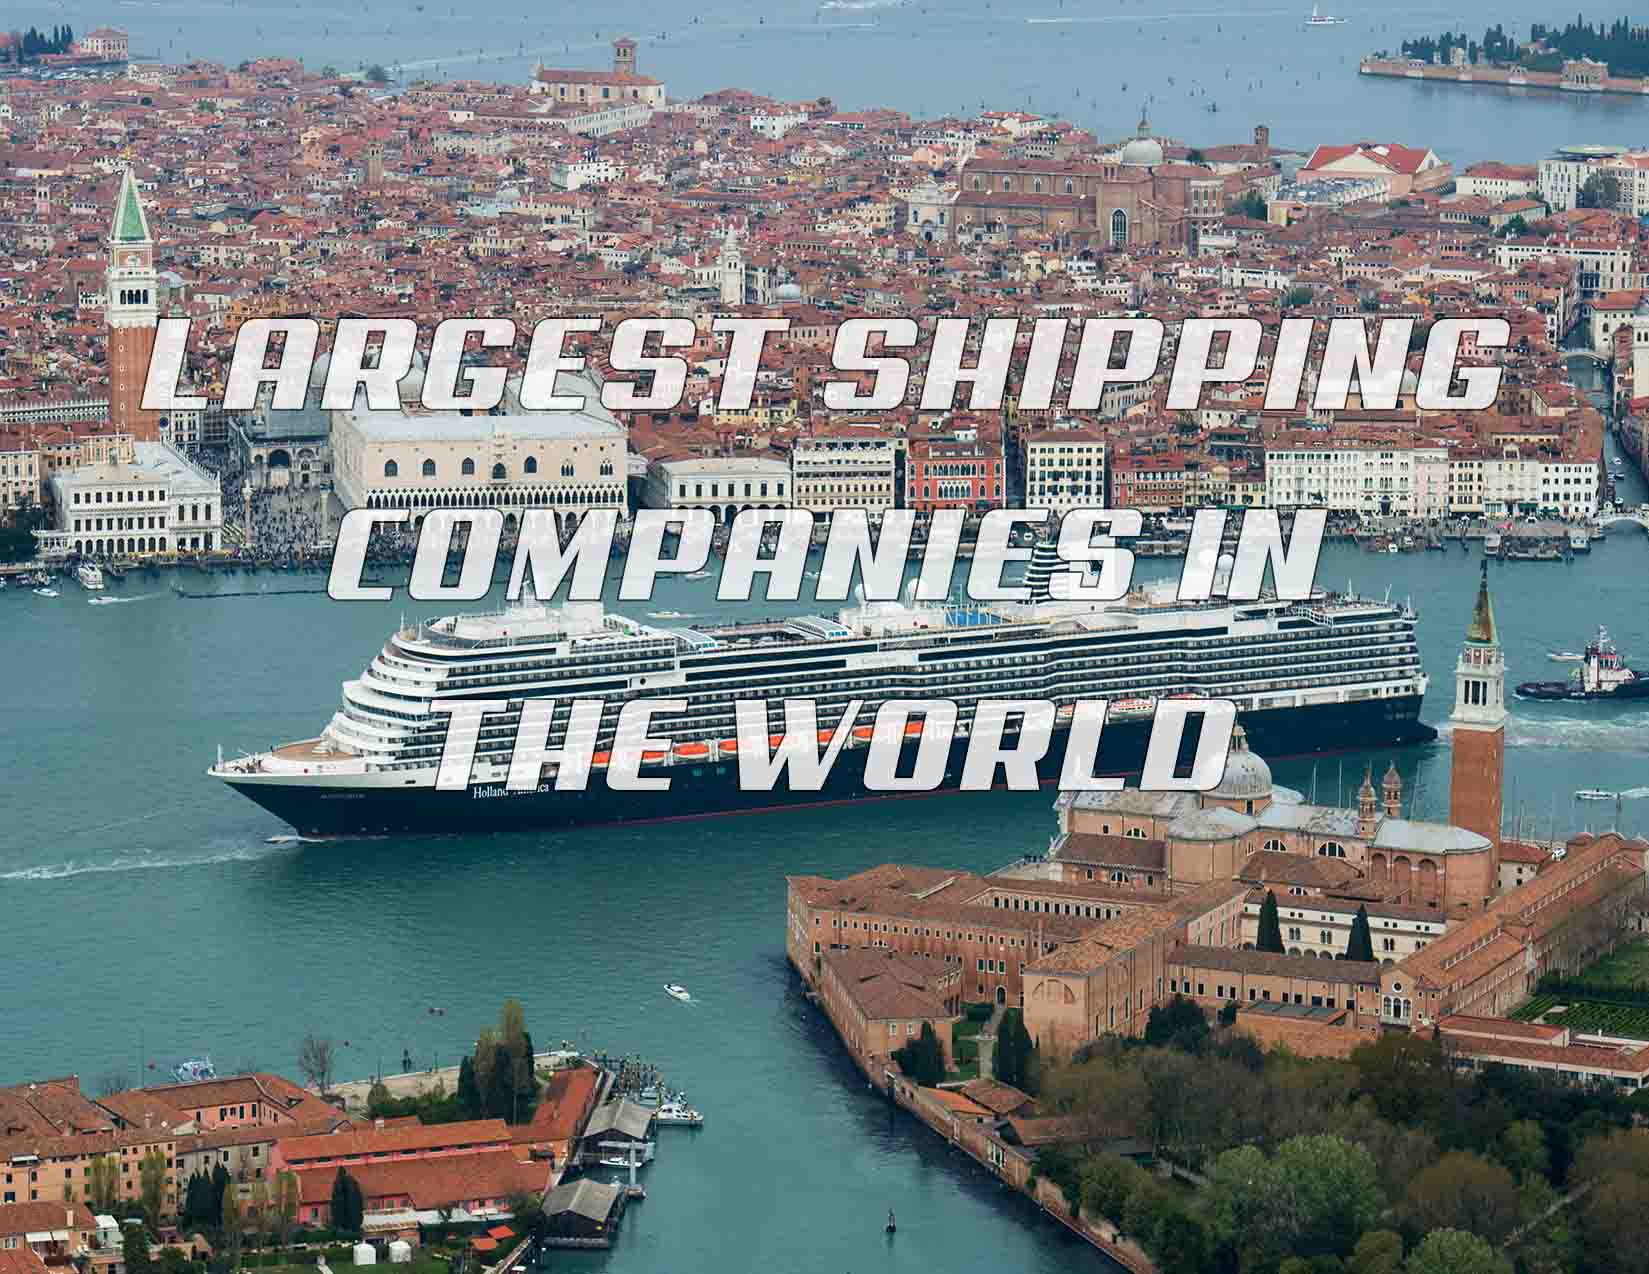 Cover photo for the article "Largest Shipping Companies in the World" with a background of the cruise ship MS Koningsdam from Holland American Lines is channeling in Venice.